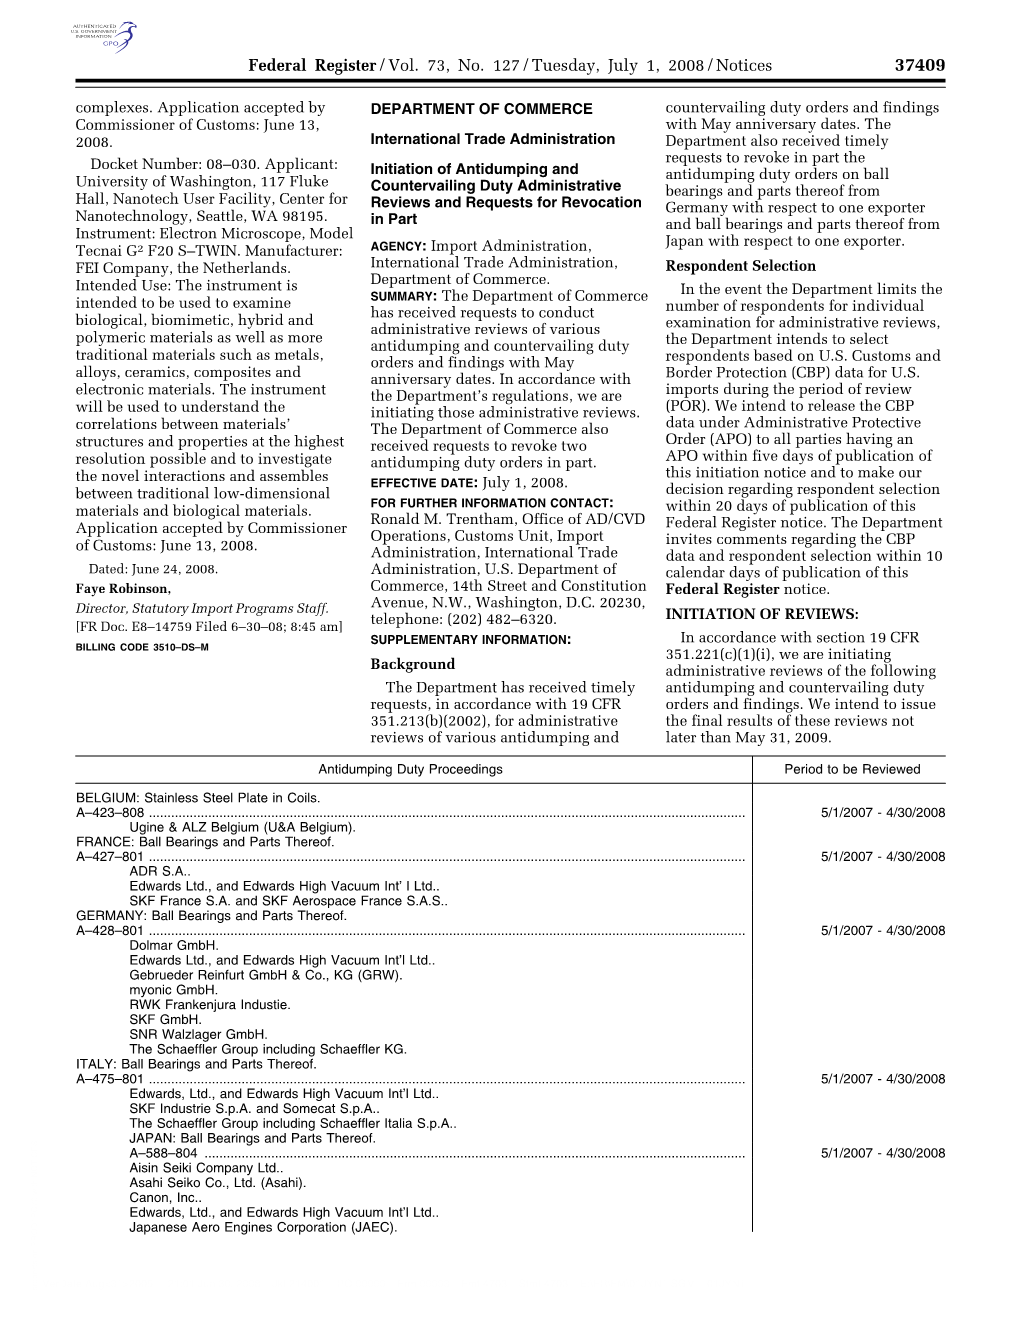 Federal Register/Vol. 73, No. 127/Tuesday, July 1, 2008/Notices